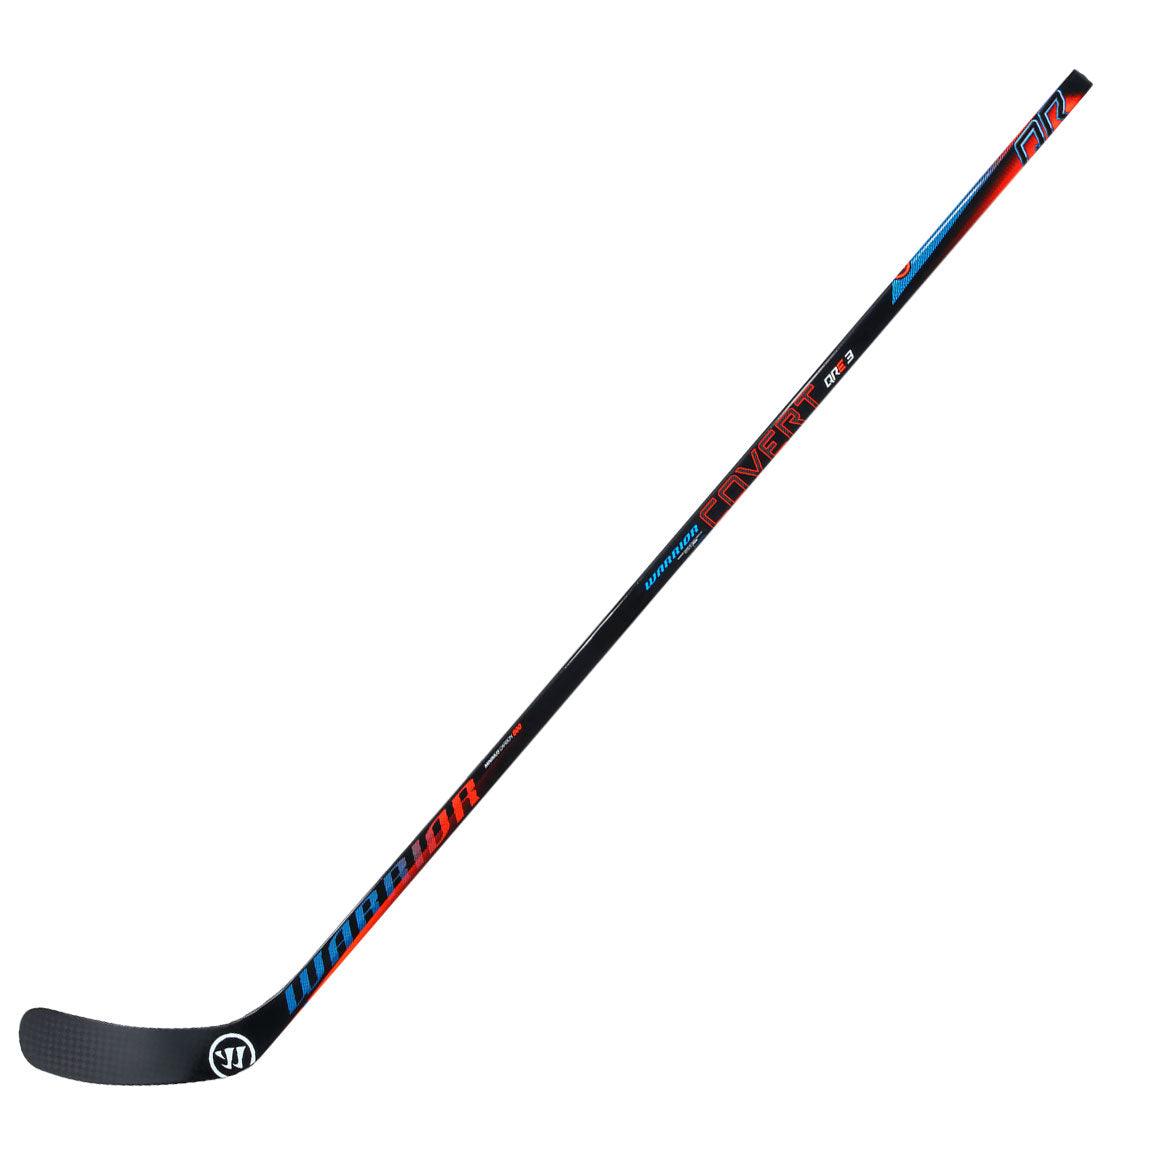 Covert QRE 3 Hockey Stick - Intermediate - Sports Excellence